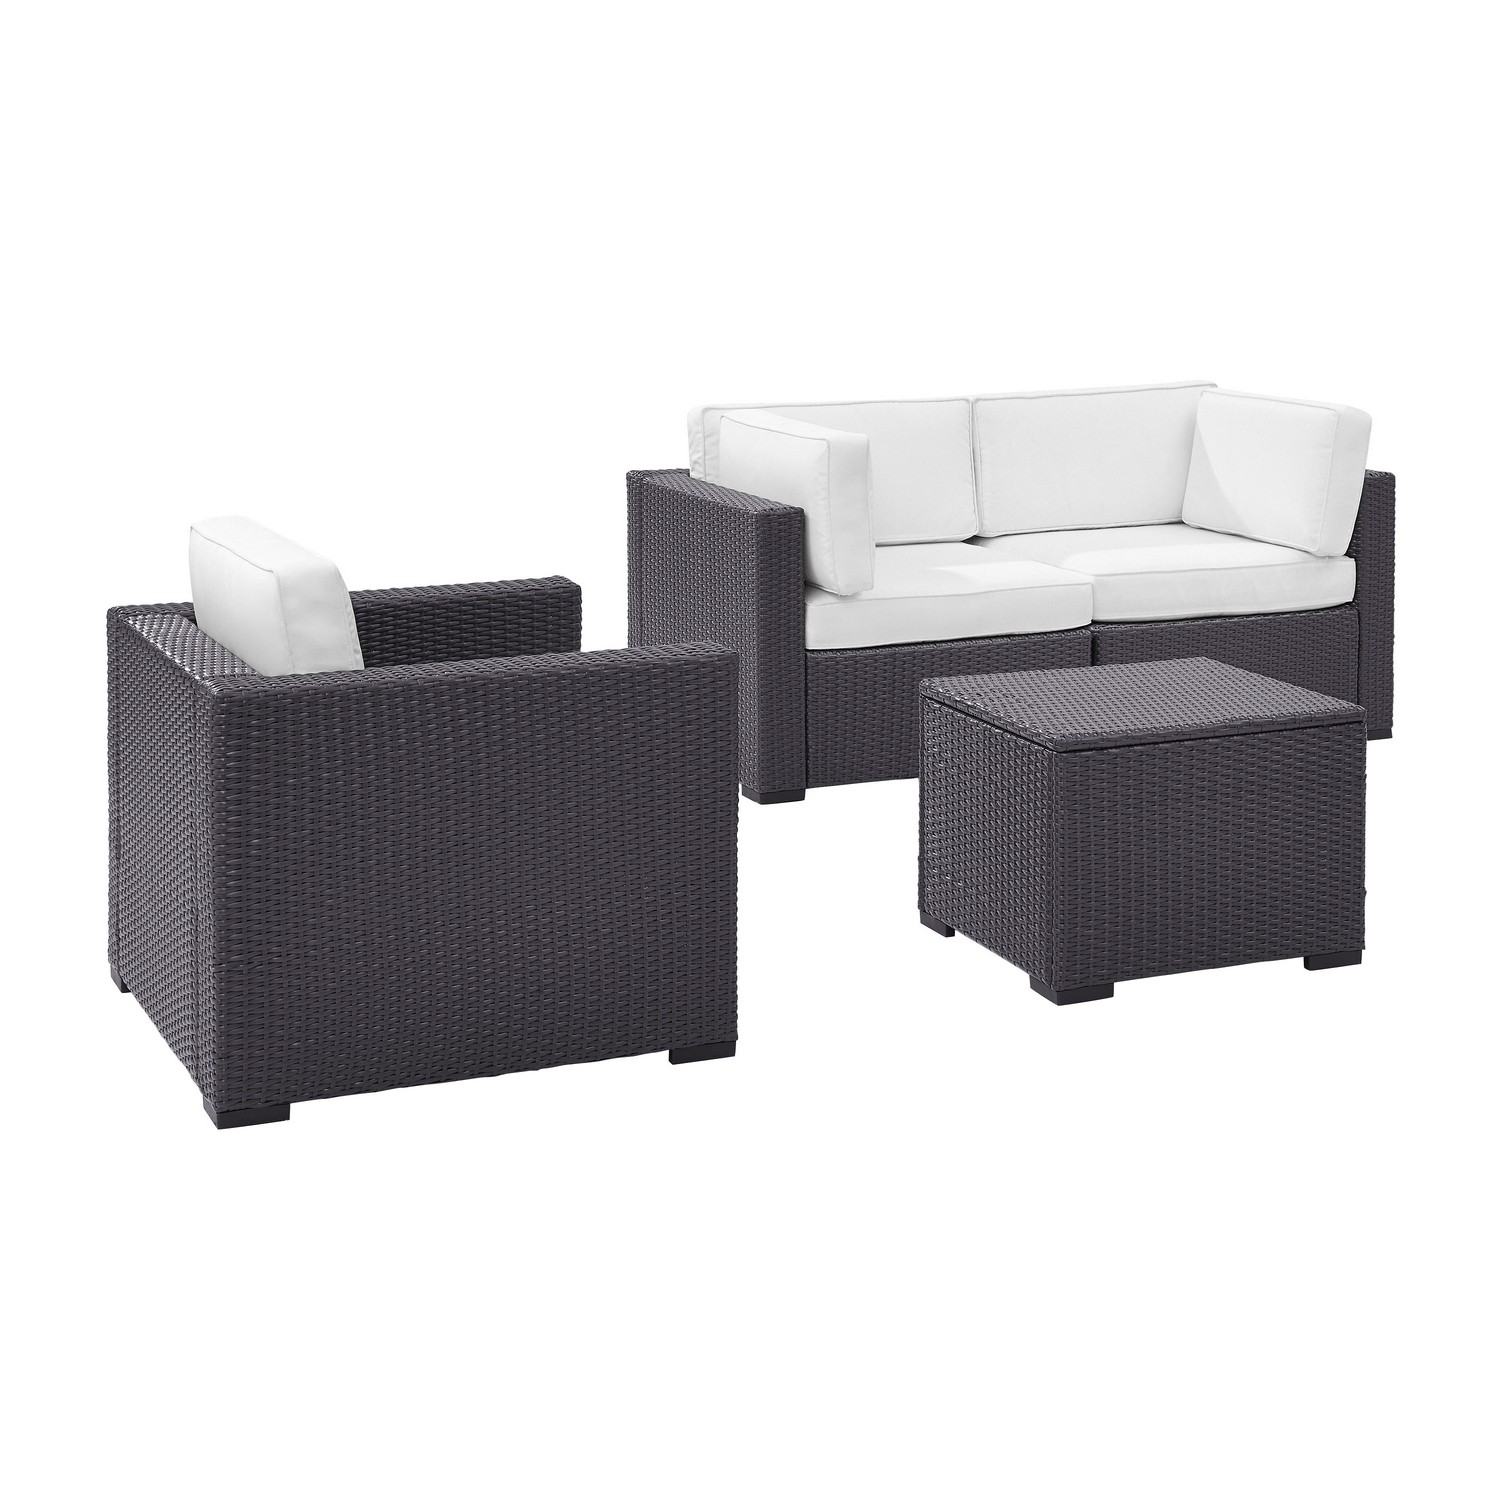 Crosley Biscayne 4-PC Outdoor Wicker Sectional Set - 2 Corner Chairs, Arm Chair, Coffee Table - White/Brown